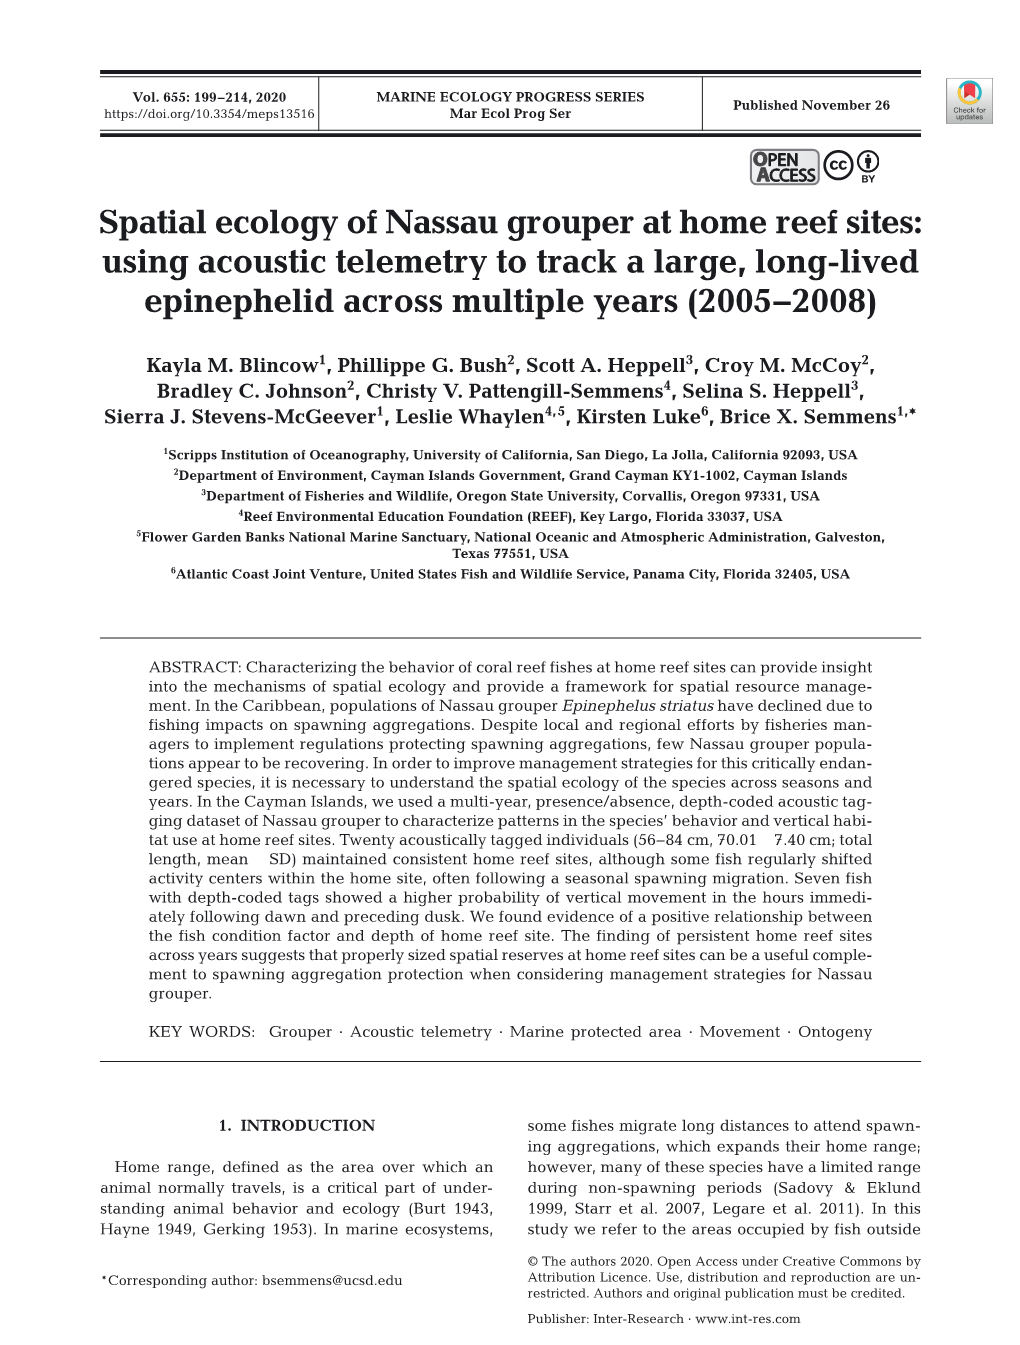 Spatial Ecology of Nassau Grouper at Home Reef Sites: Using Acoustic Telemetry to Track a Large, Long-Lived Epinephelid Across Multiple Years (2005−2008)